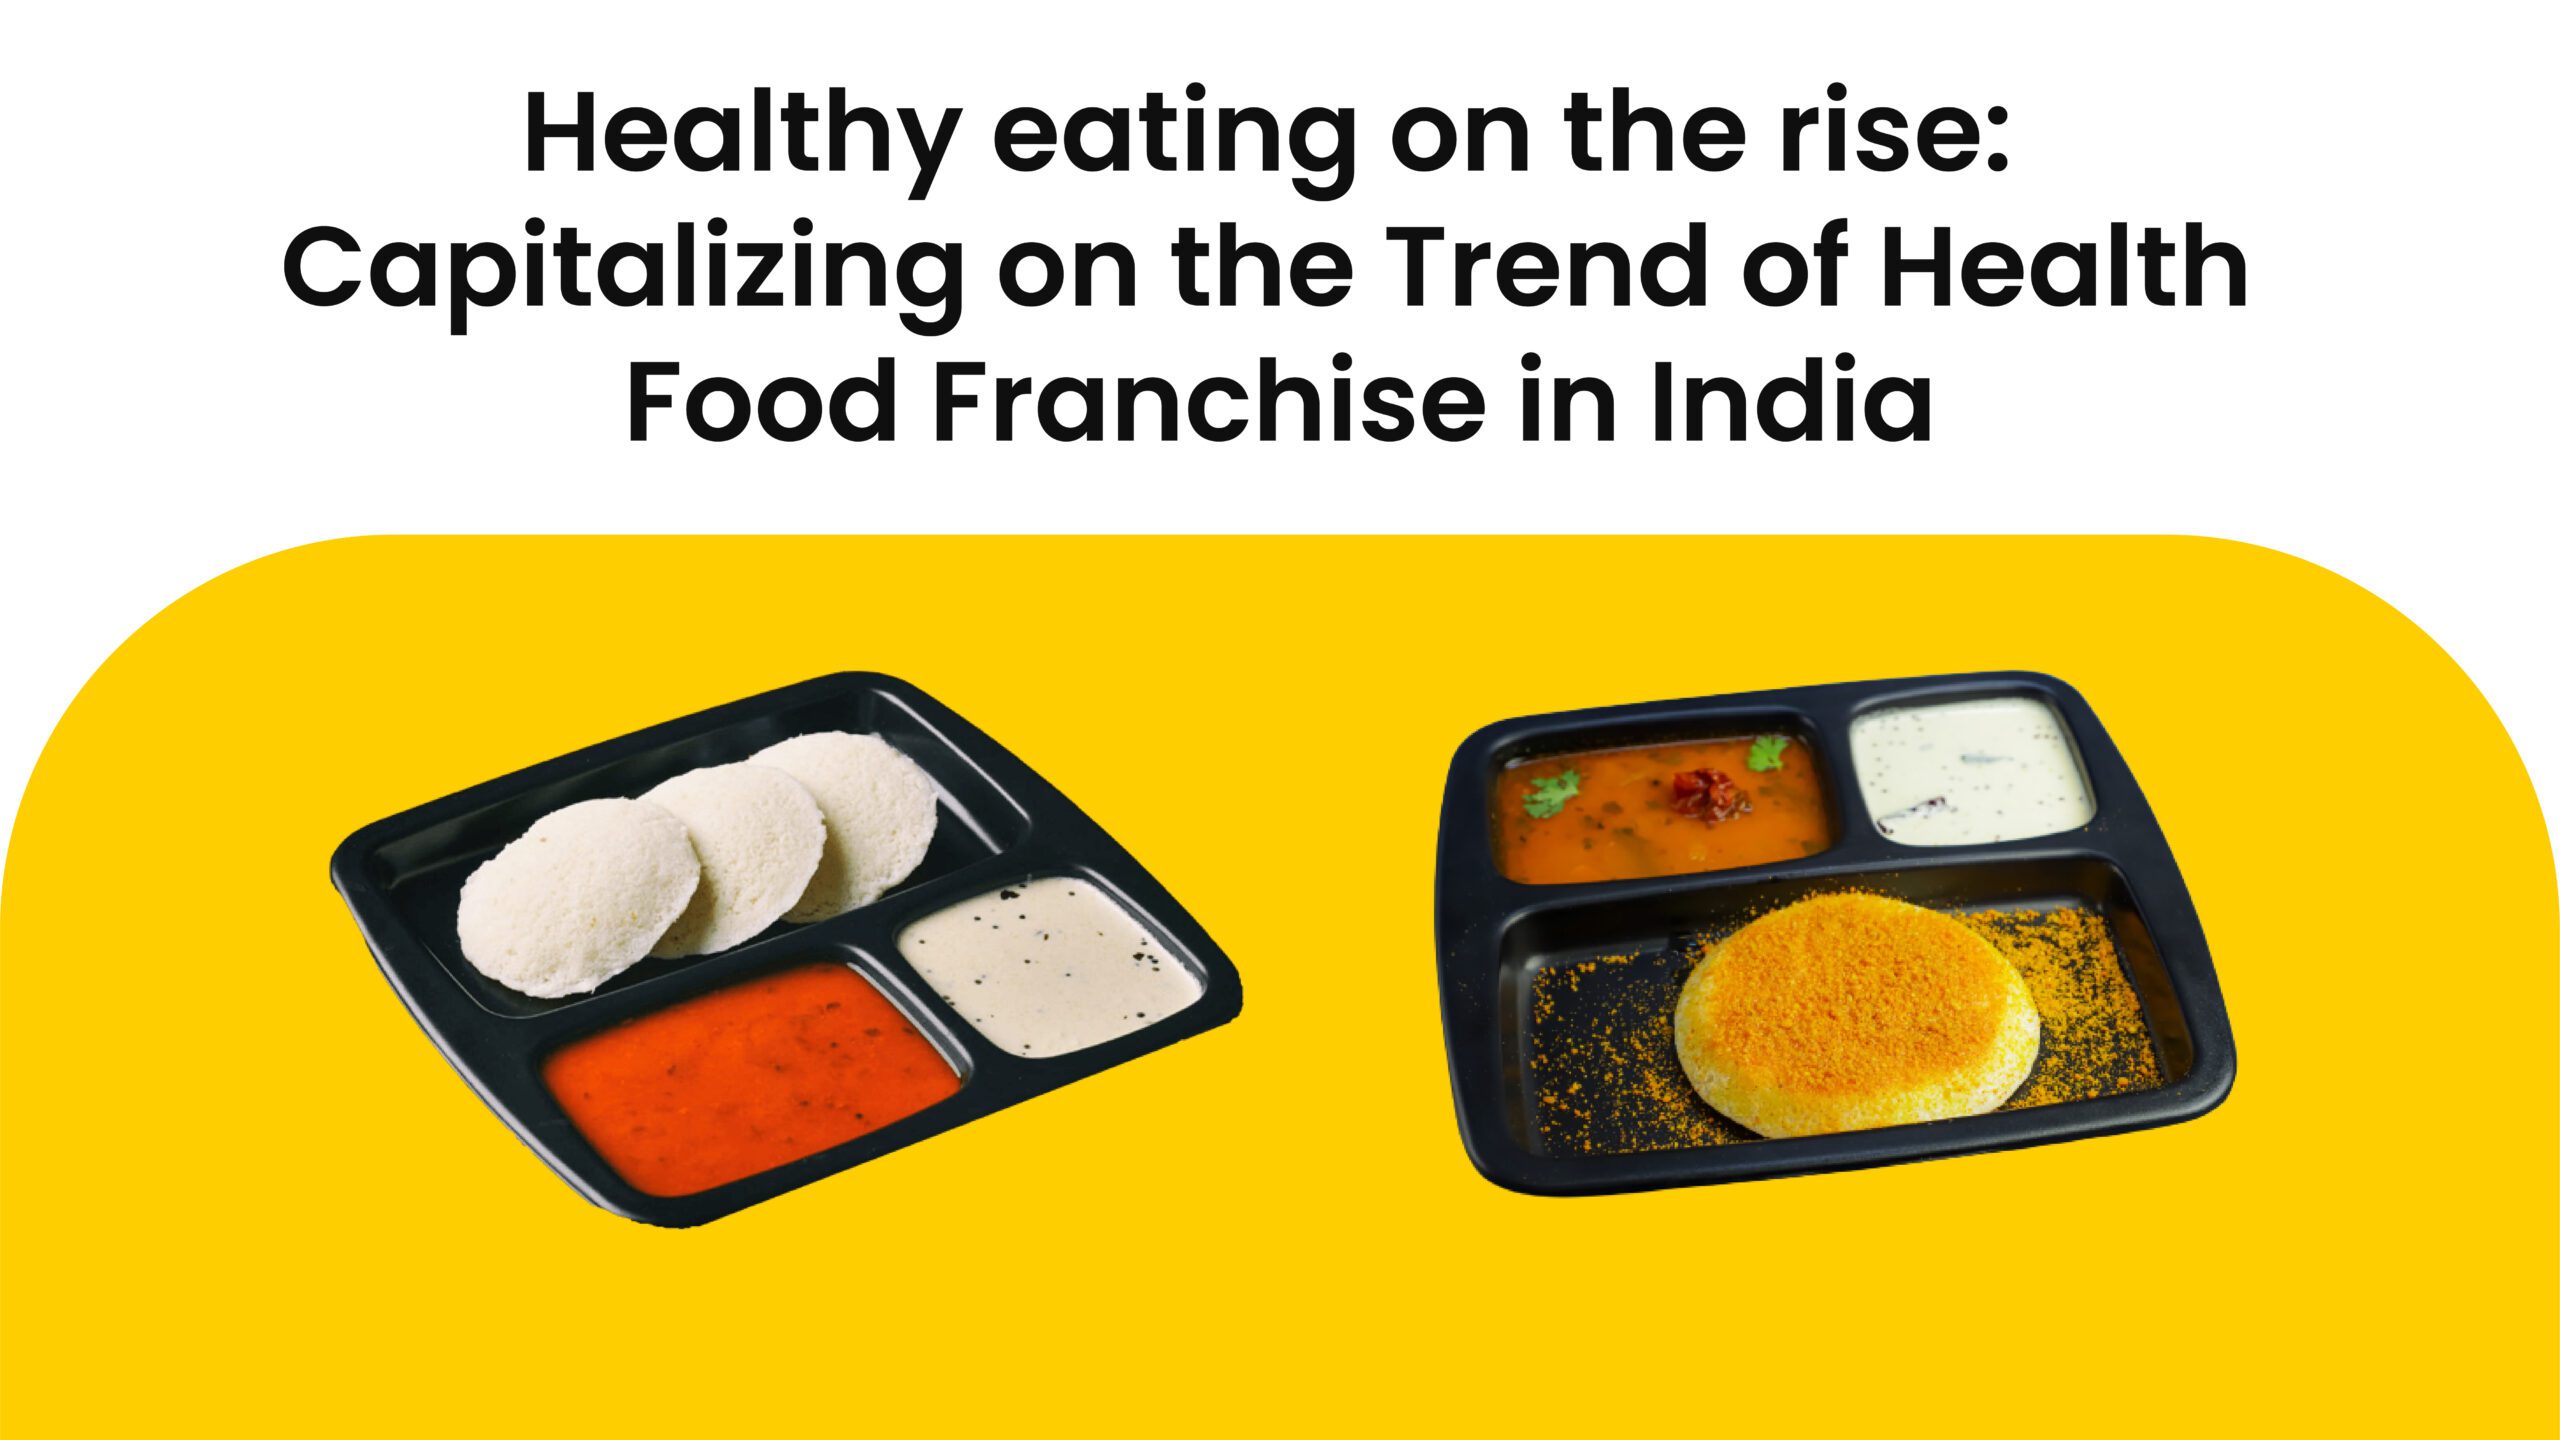 Healthy eating on the rise: Capitalizing on the Trend of Health Food Franchise in India